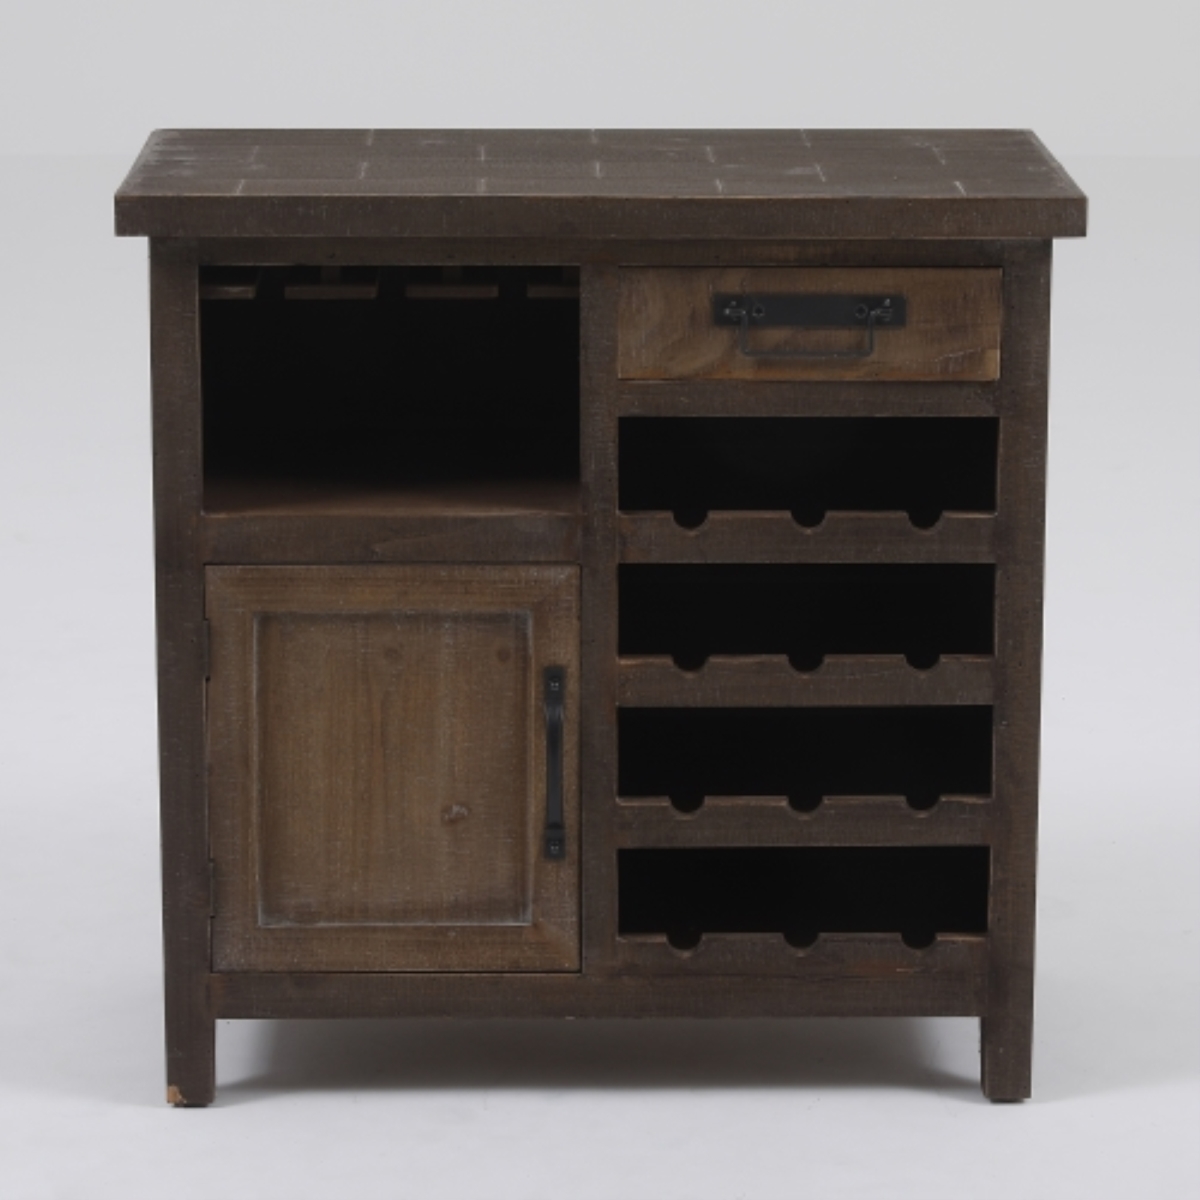 Luxen Home Whif353 Wine Station Wood Console Cabinet - Brown